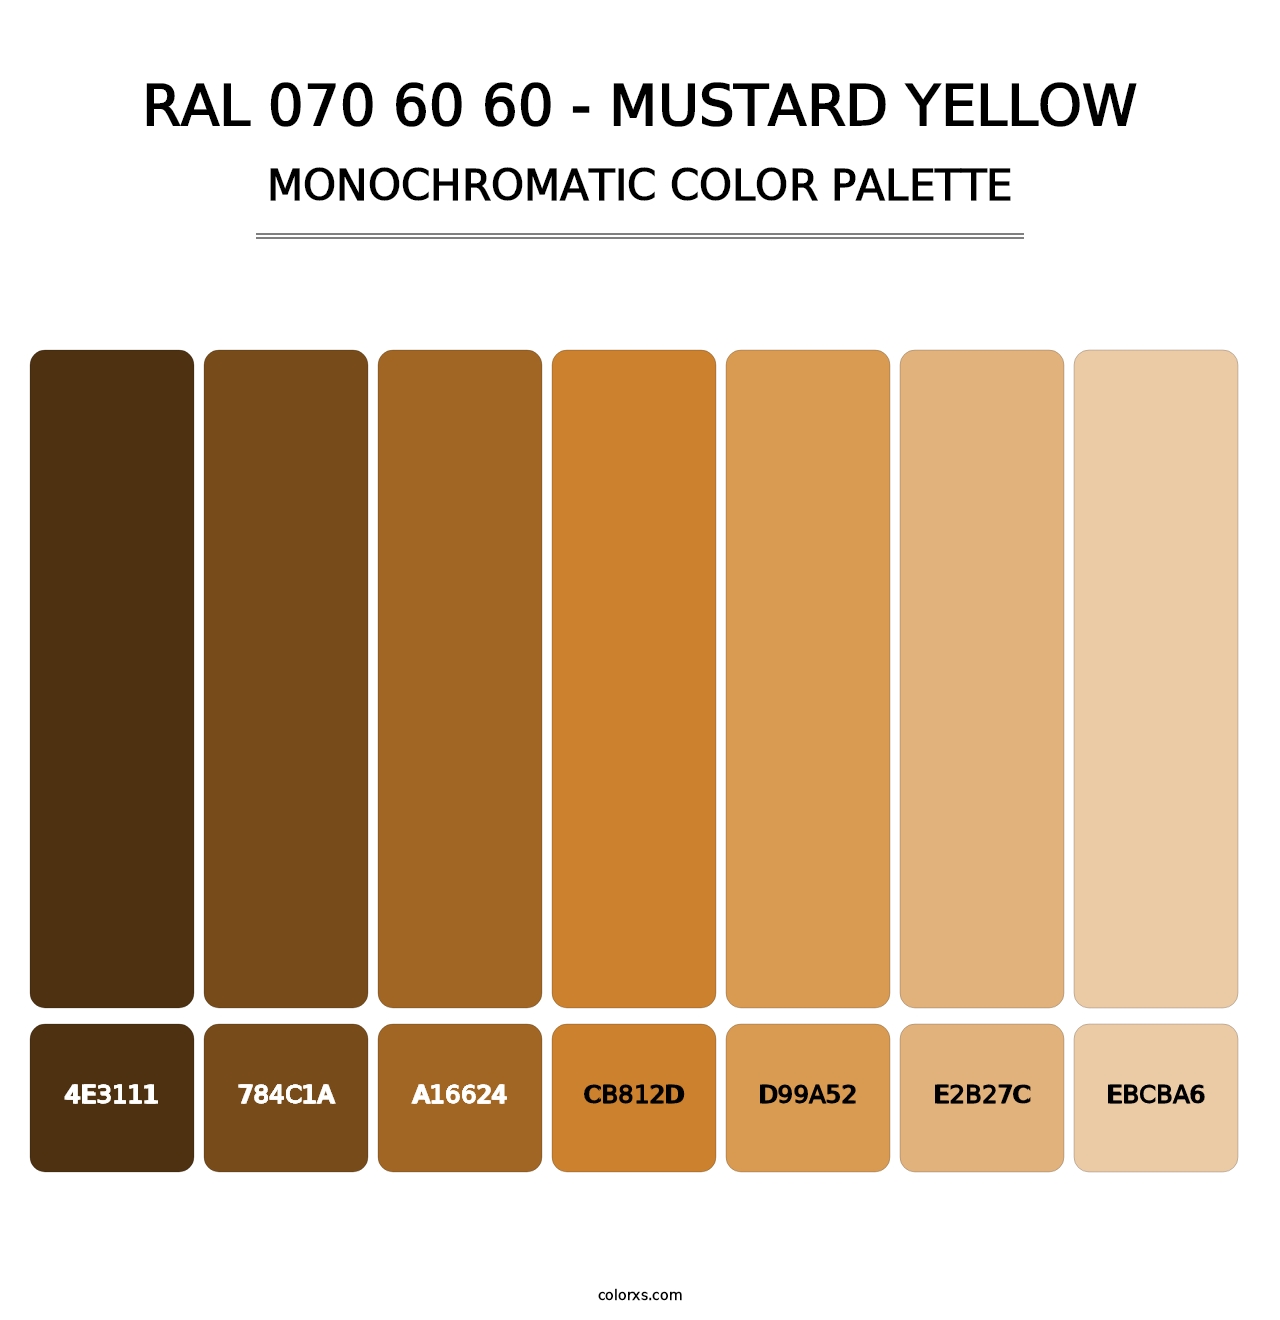 RAL 070 60 60 - Mustard Yellow - Monochromatic Color Palette